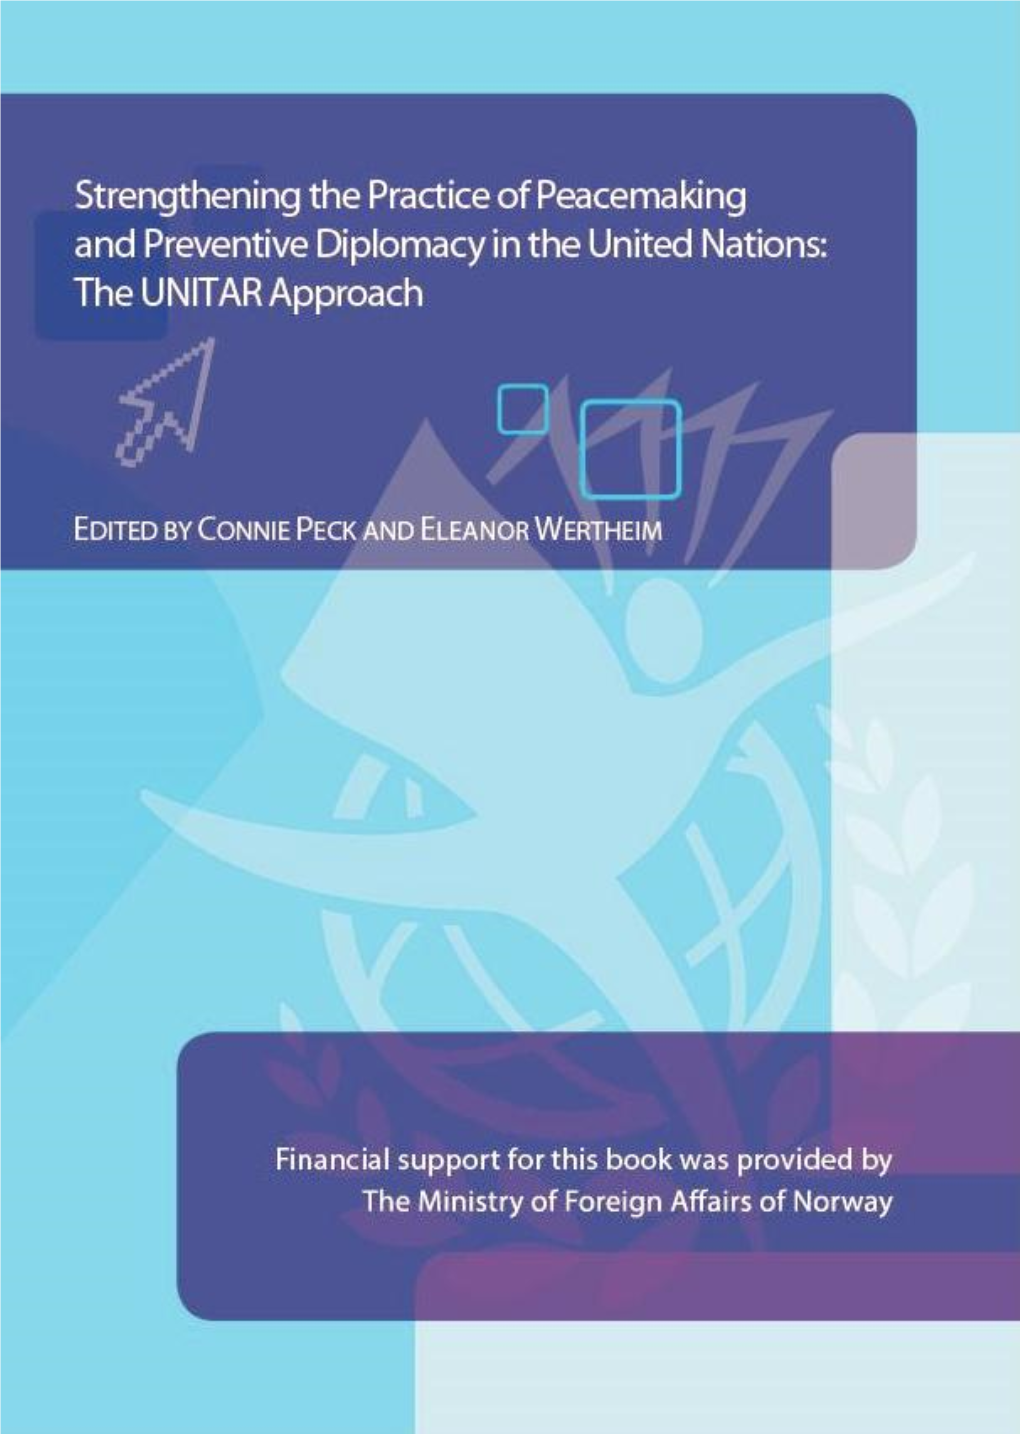 Strengthening the Practice of Peacemaking and Preventive Diplomacy in the United Nations: the UNITAR Approach